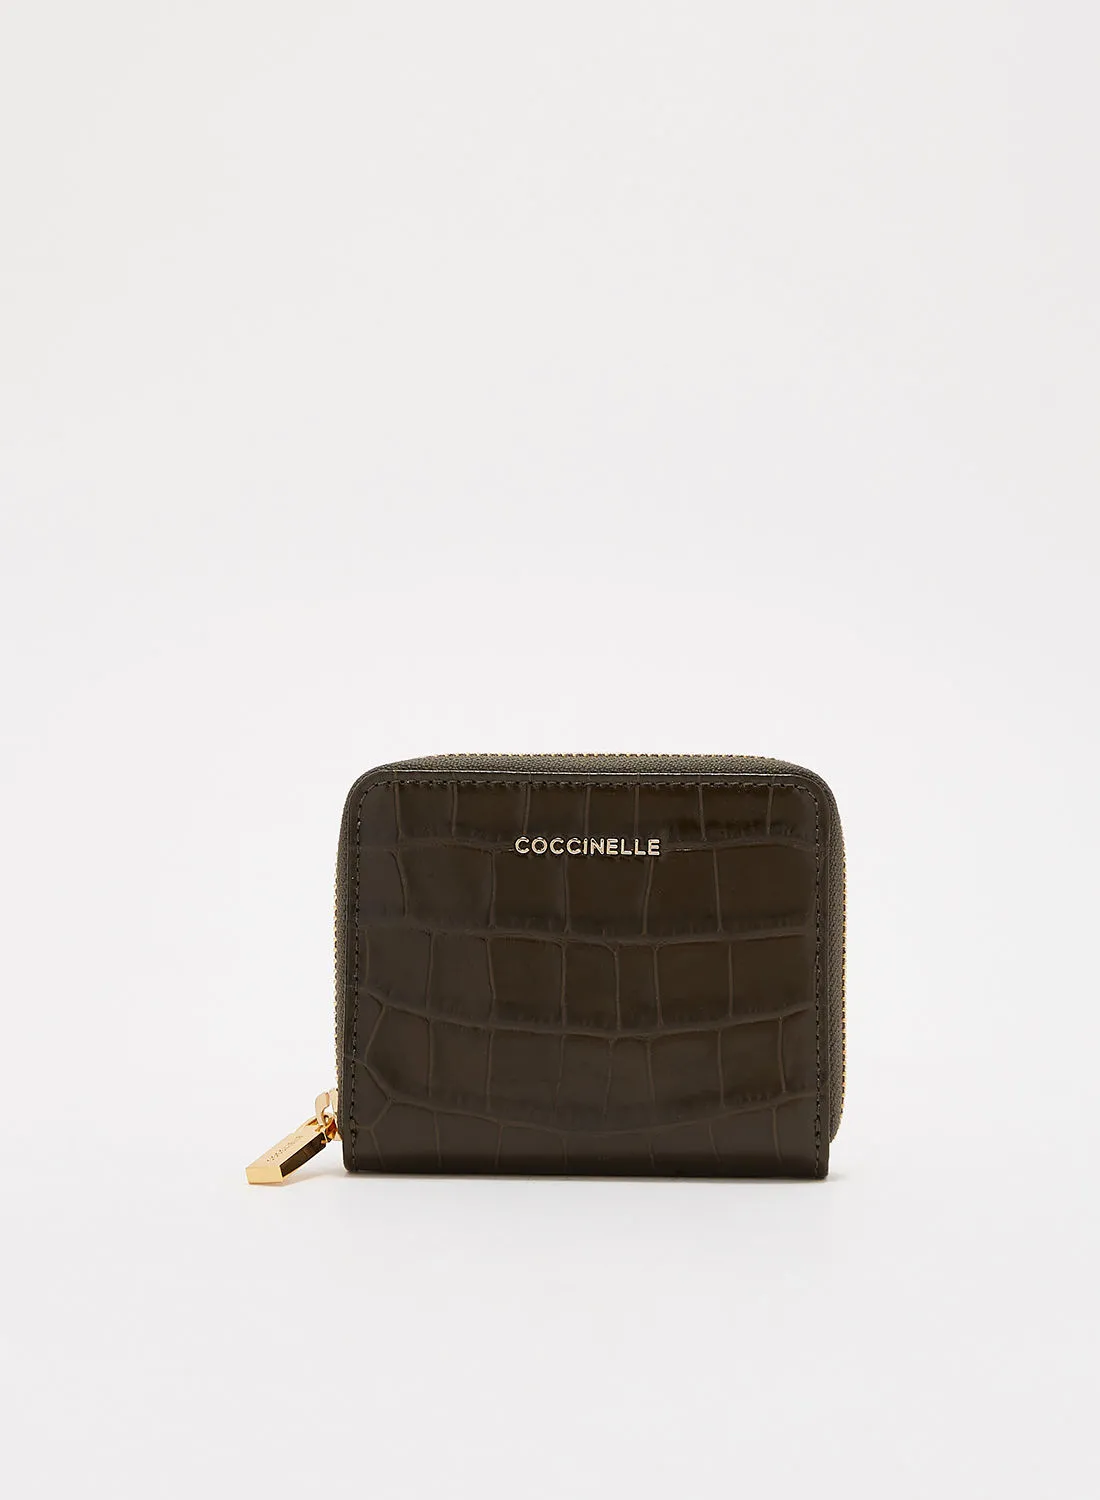 COCCINELLE Textured Leather Wallet